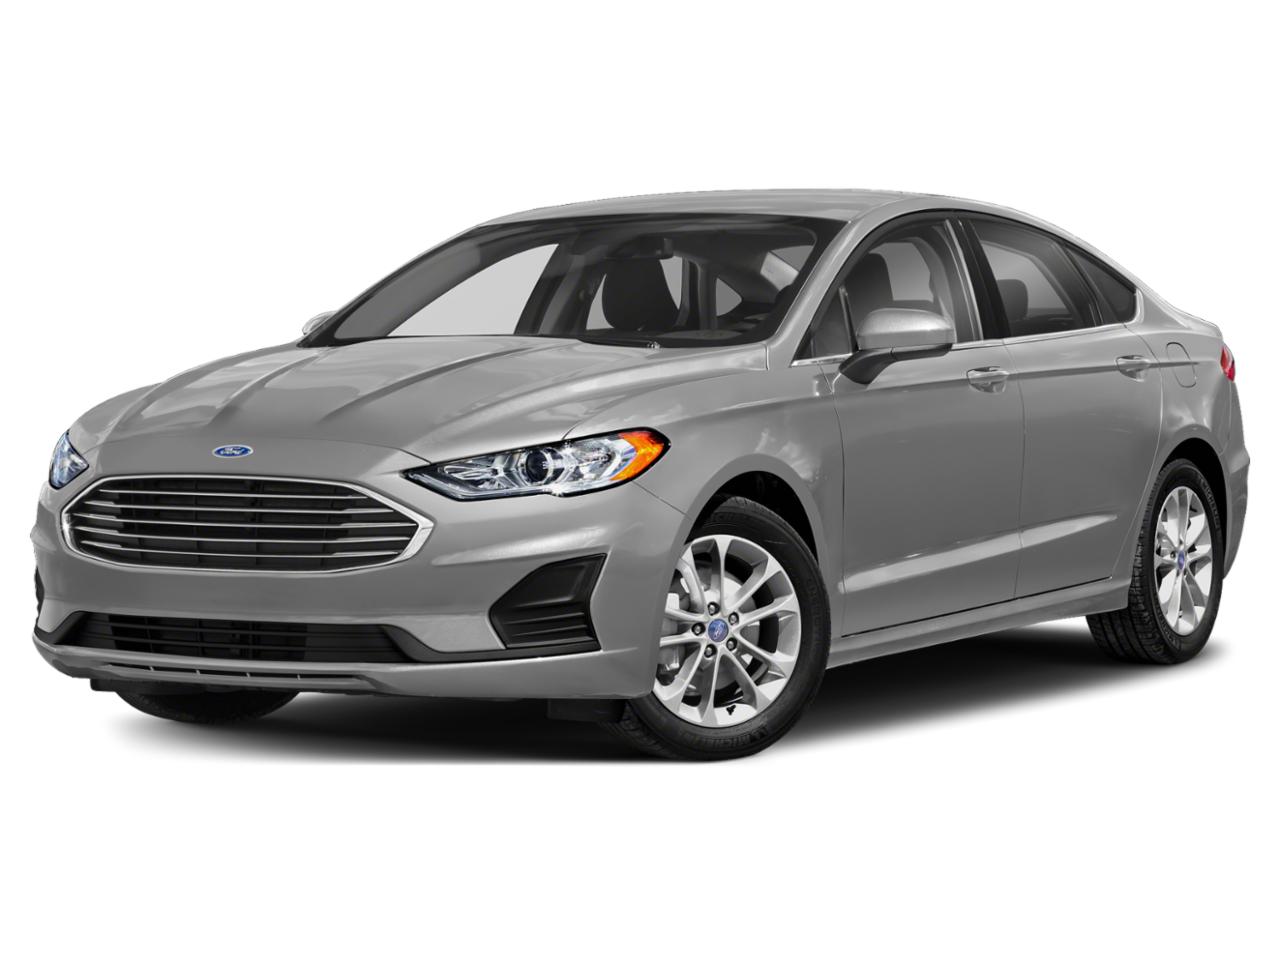 2019 Ford Fusion Vehicle Photo in Saint Charles, IL 60174